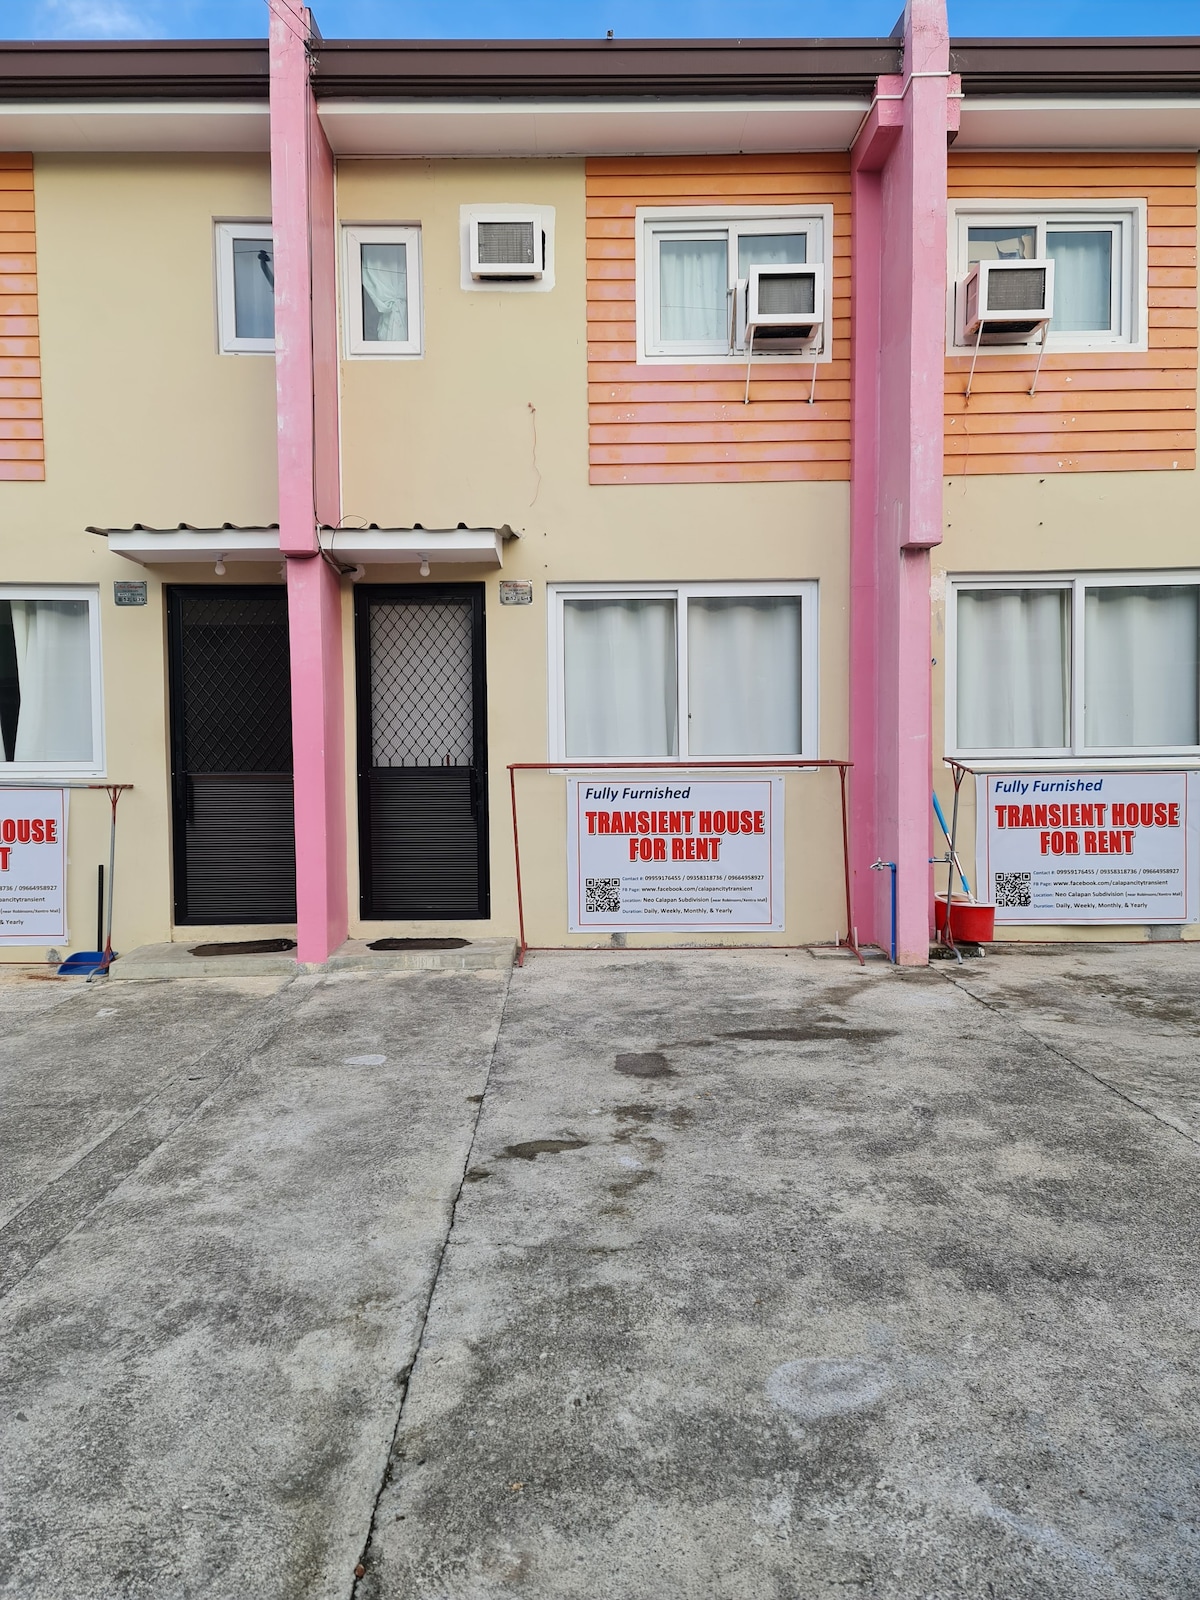 Calapan Guest House in a Subdivision near Malls